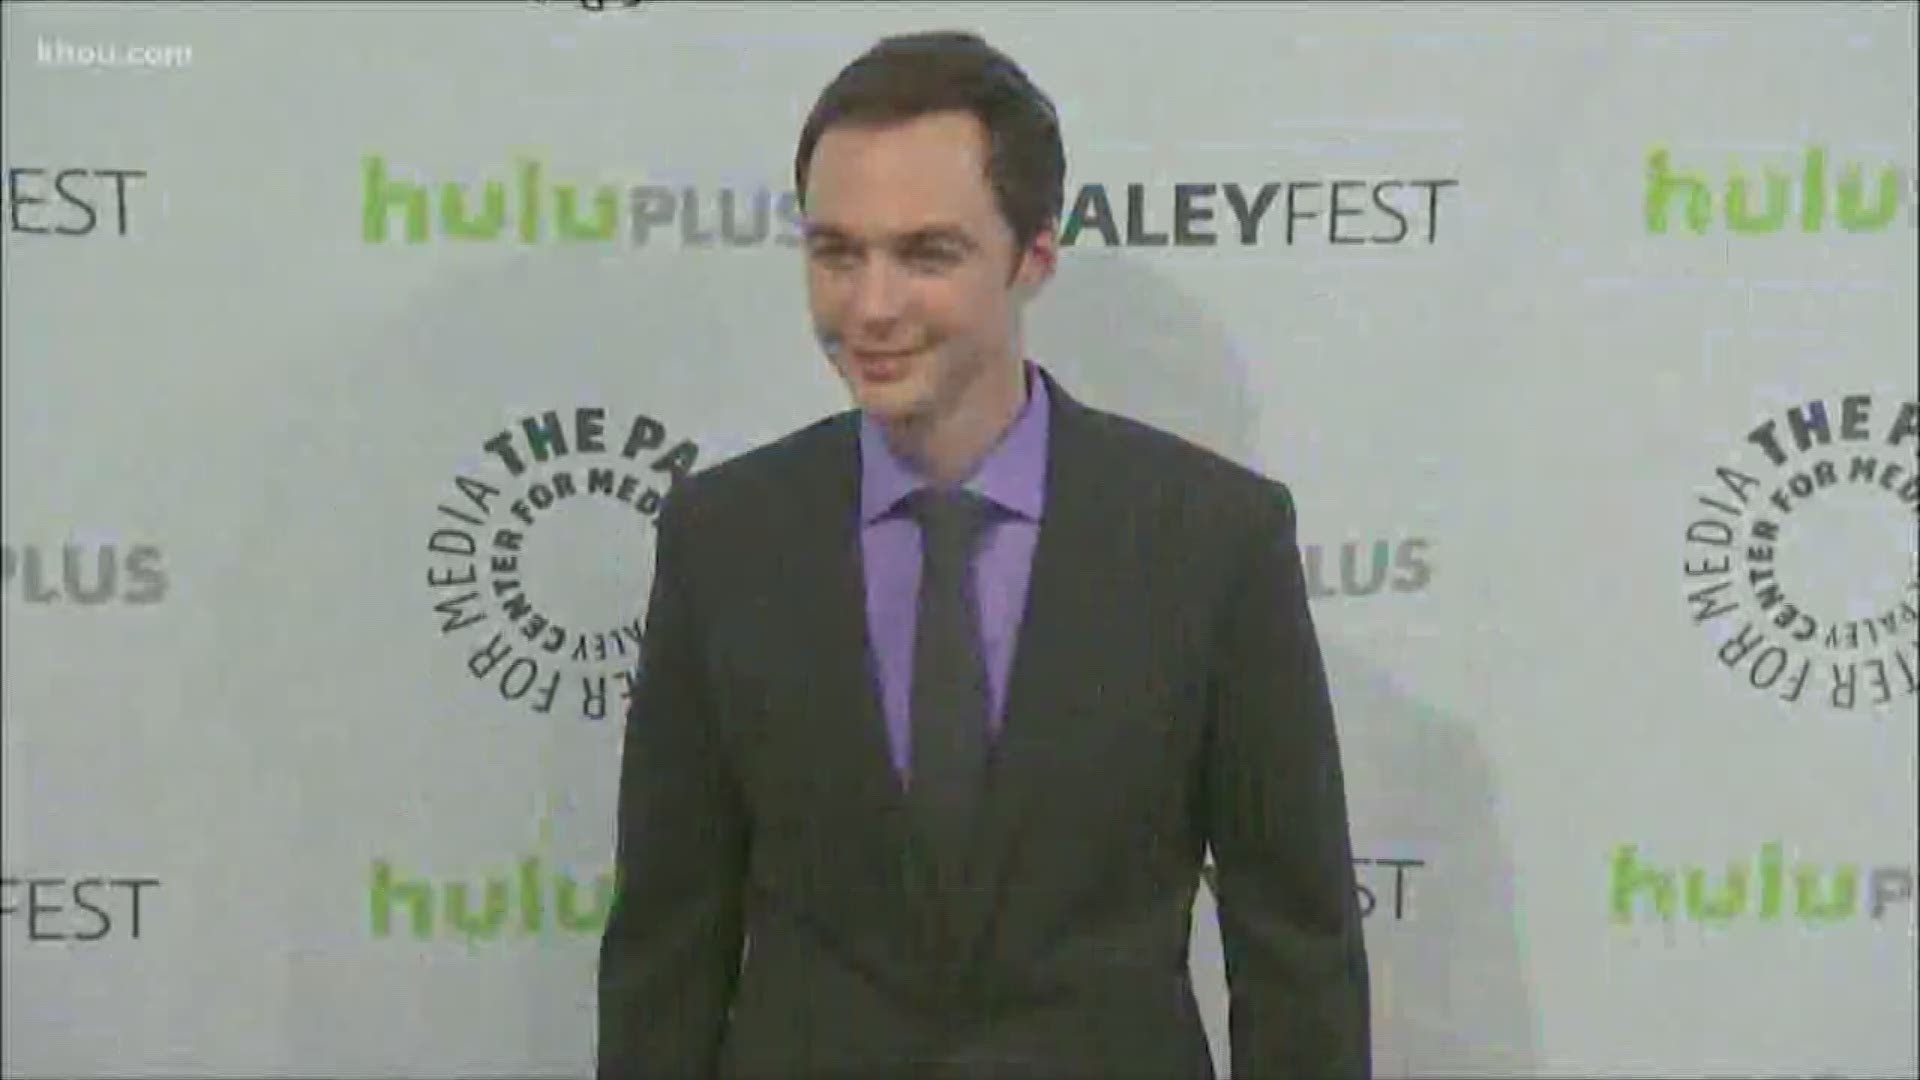 Jim Parsons, who grew up in Spring, is TV's highest-paid actor, according to Forbes.